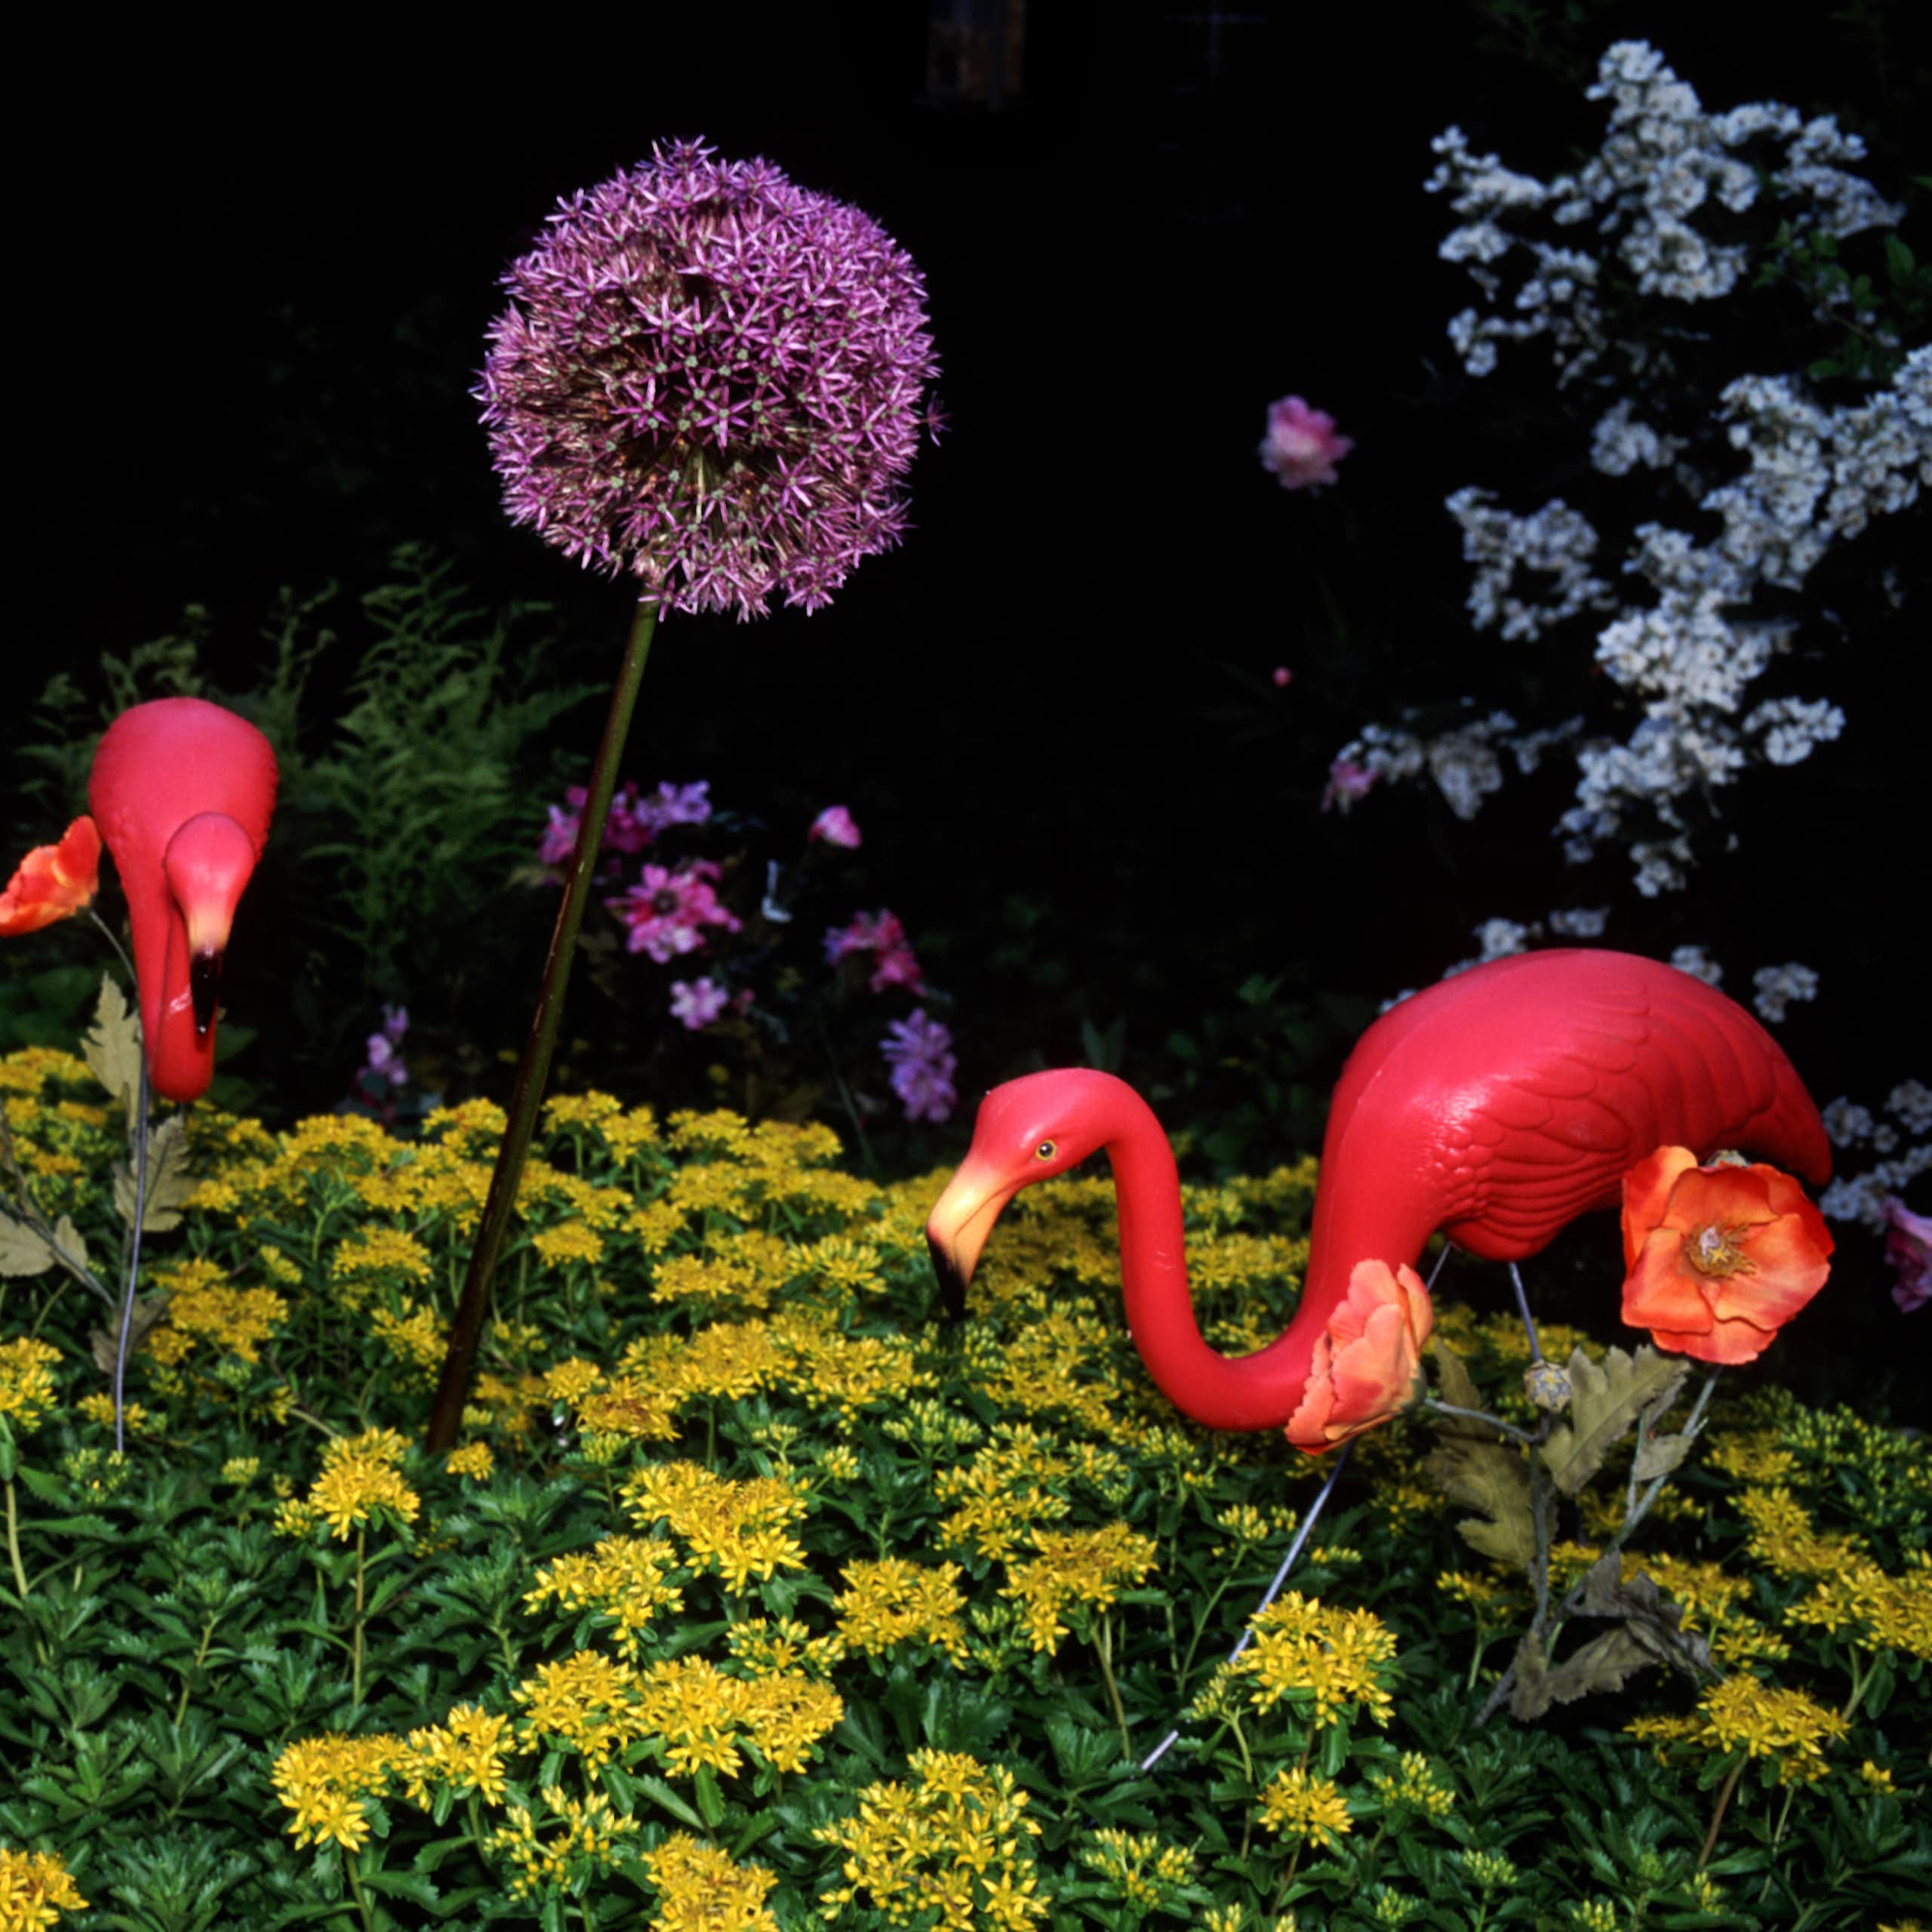 Three plastic pink flamingos placed in a garden of yellow and purple flowers.